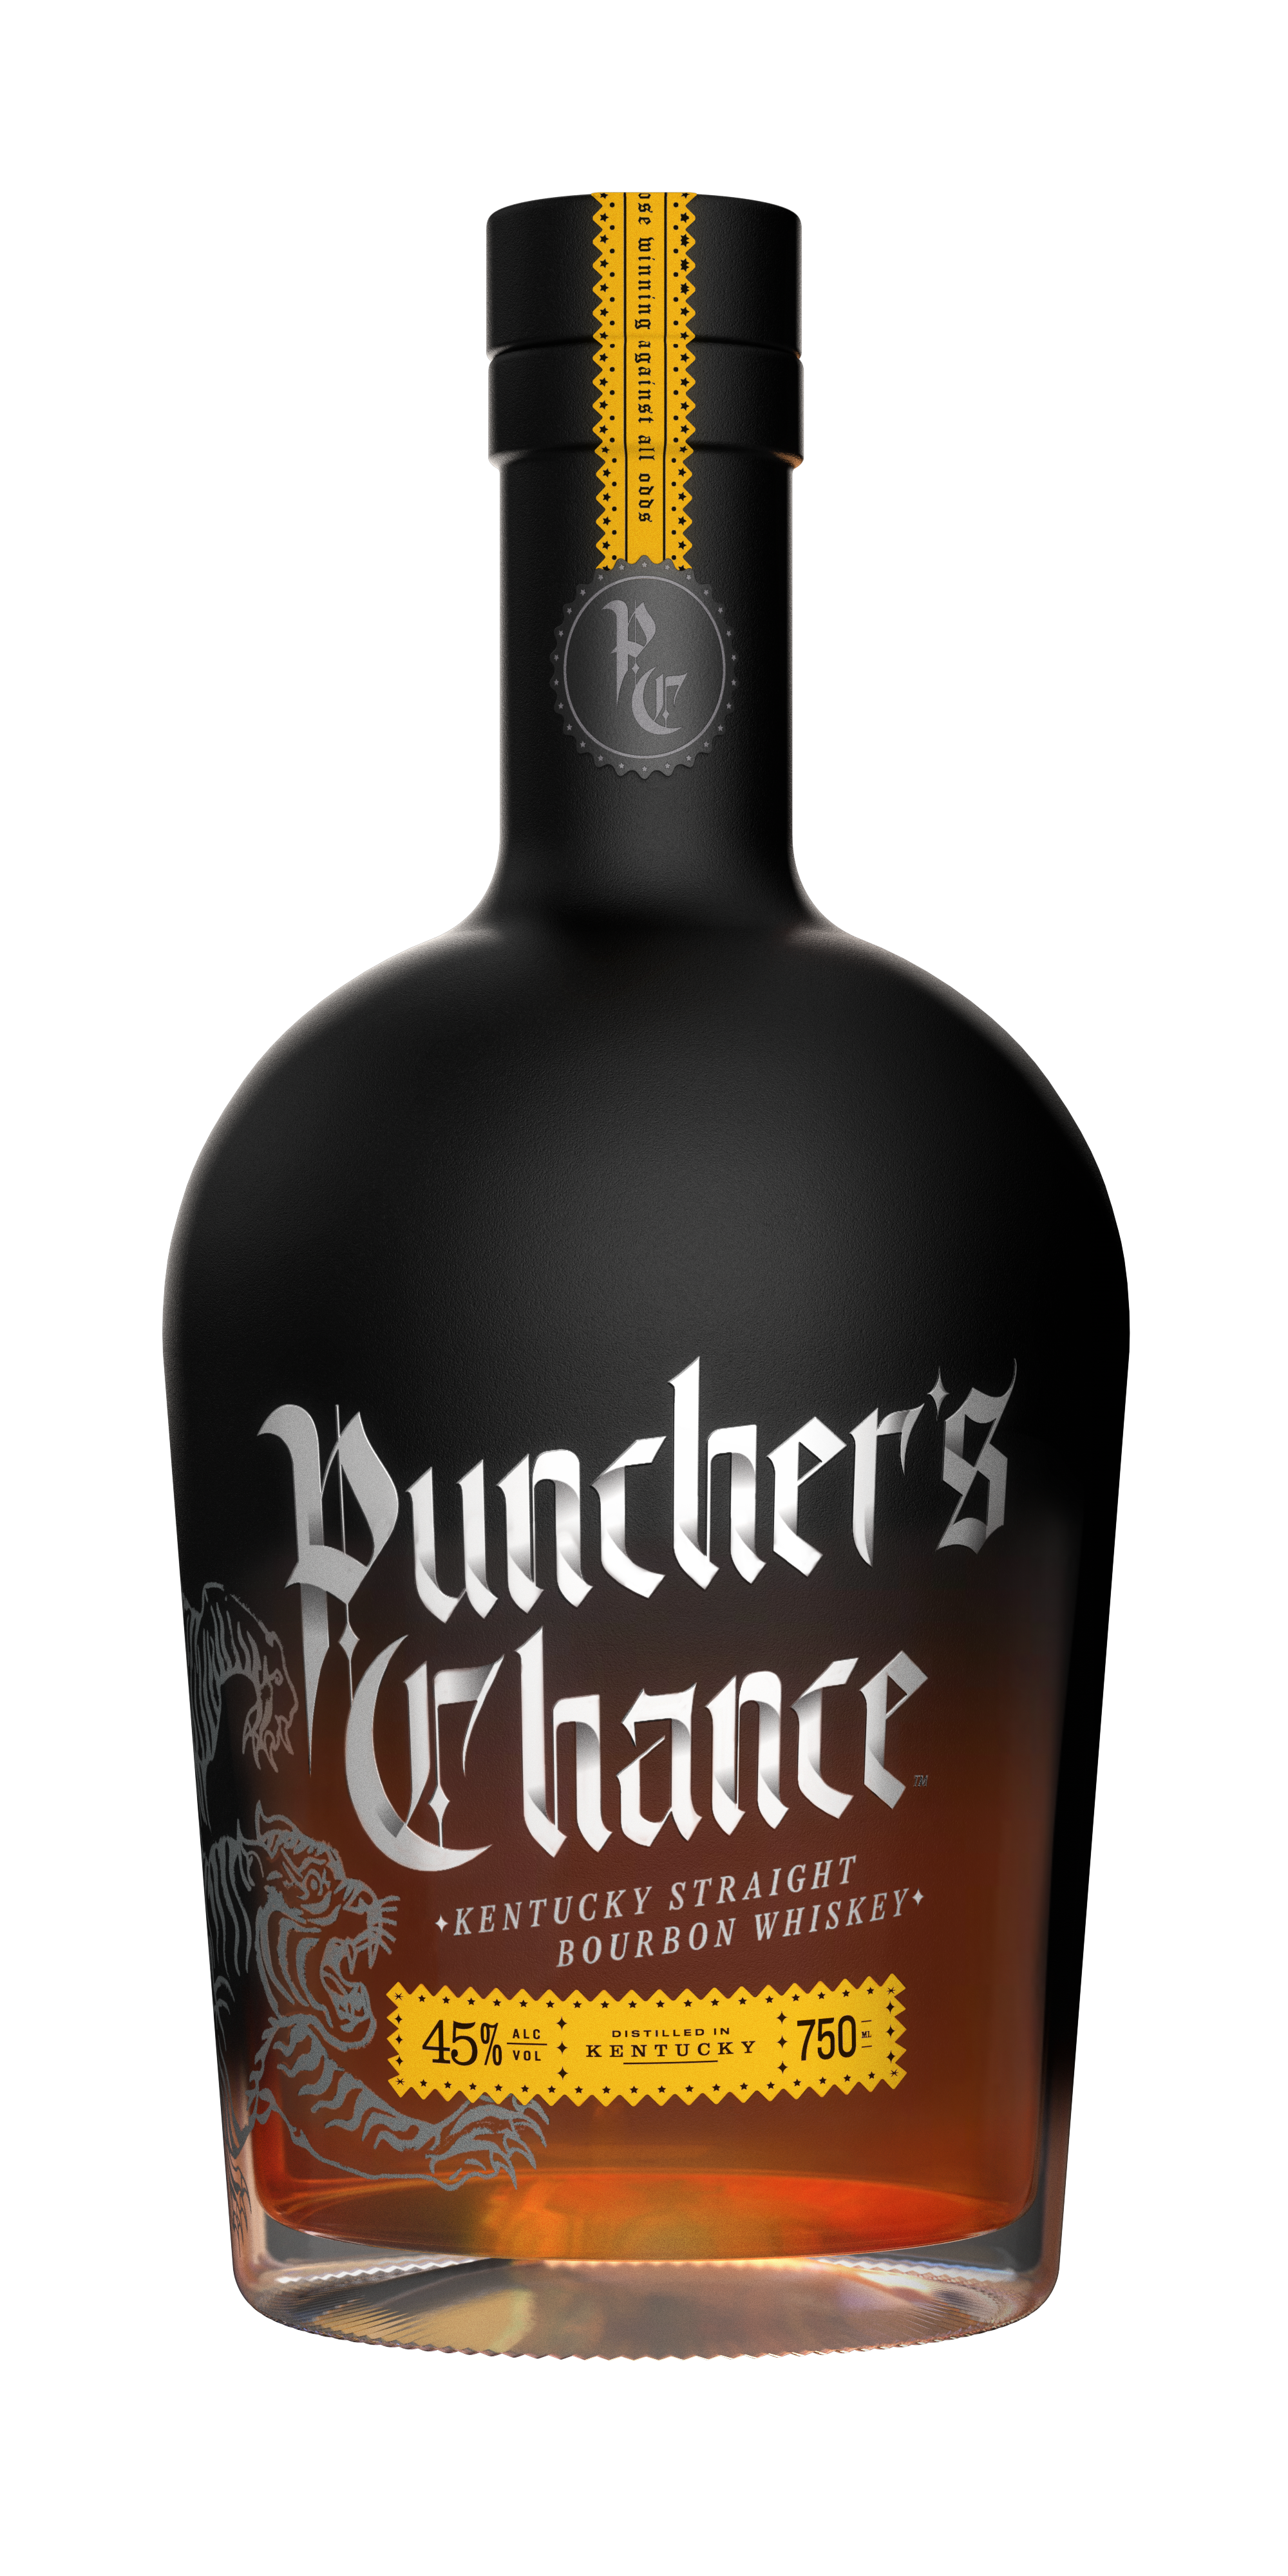 Puncher's Chance